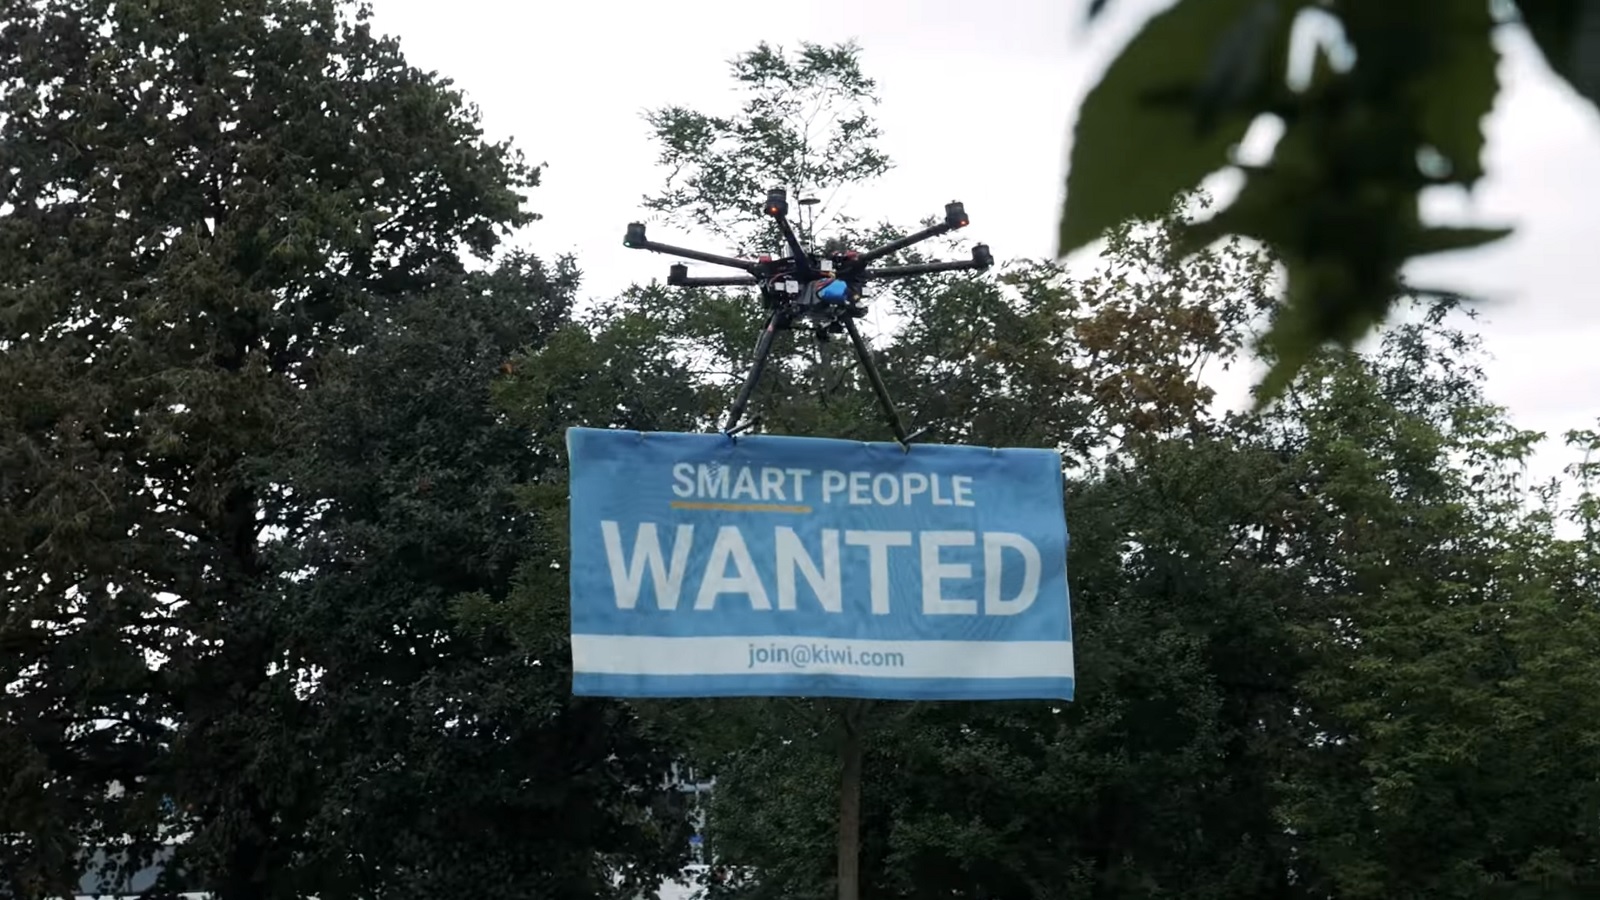 A New Trend in HR? Drones to Headhunt Smart People!